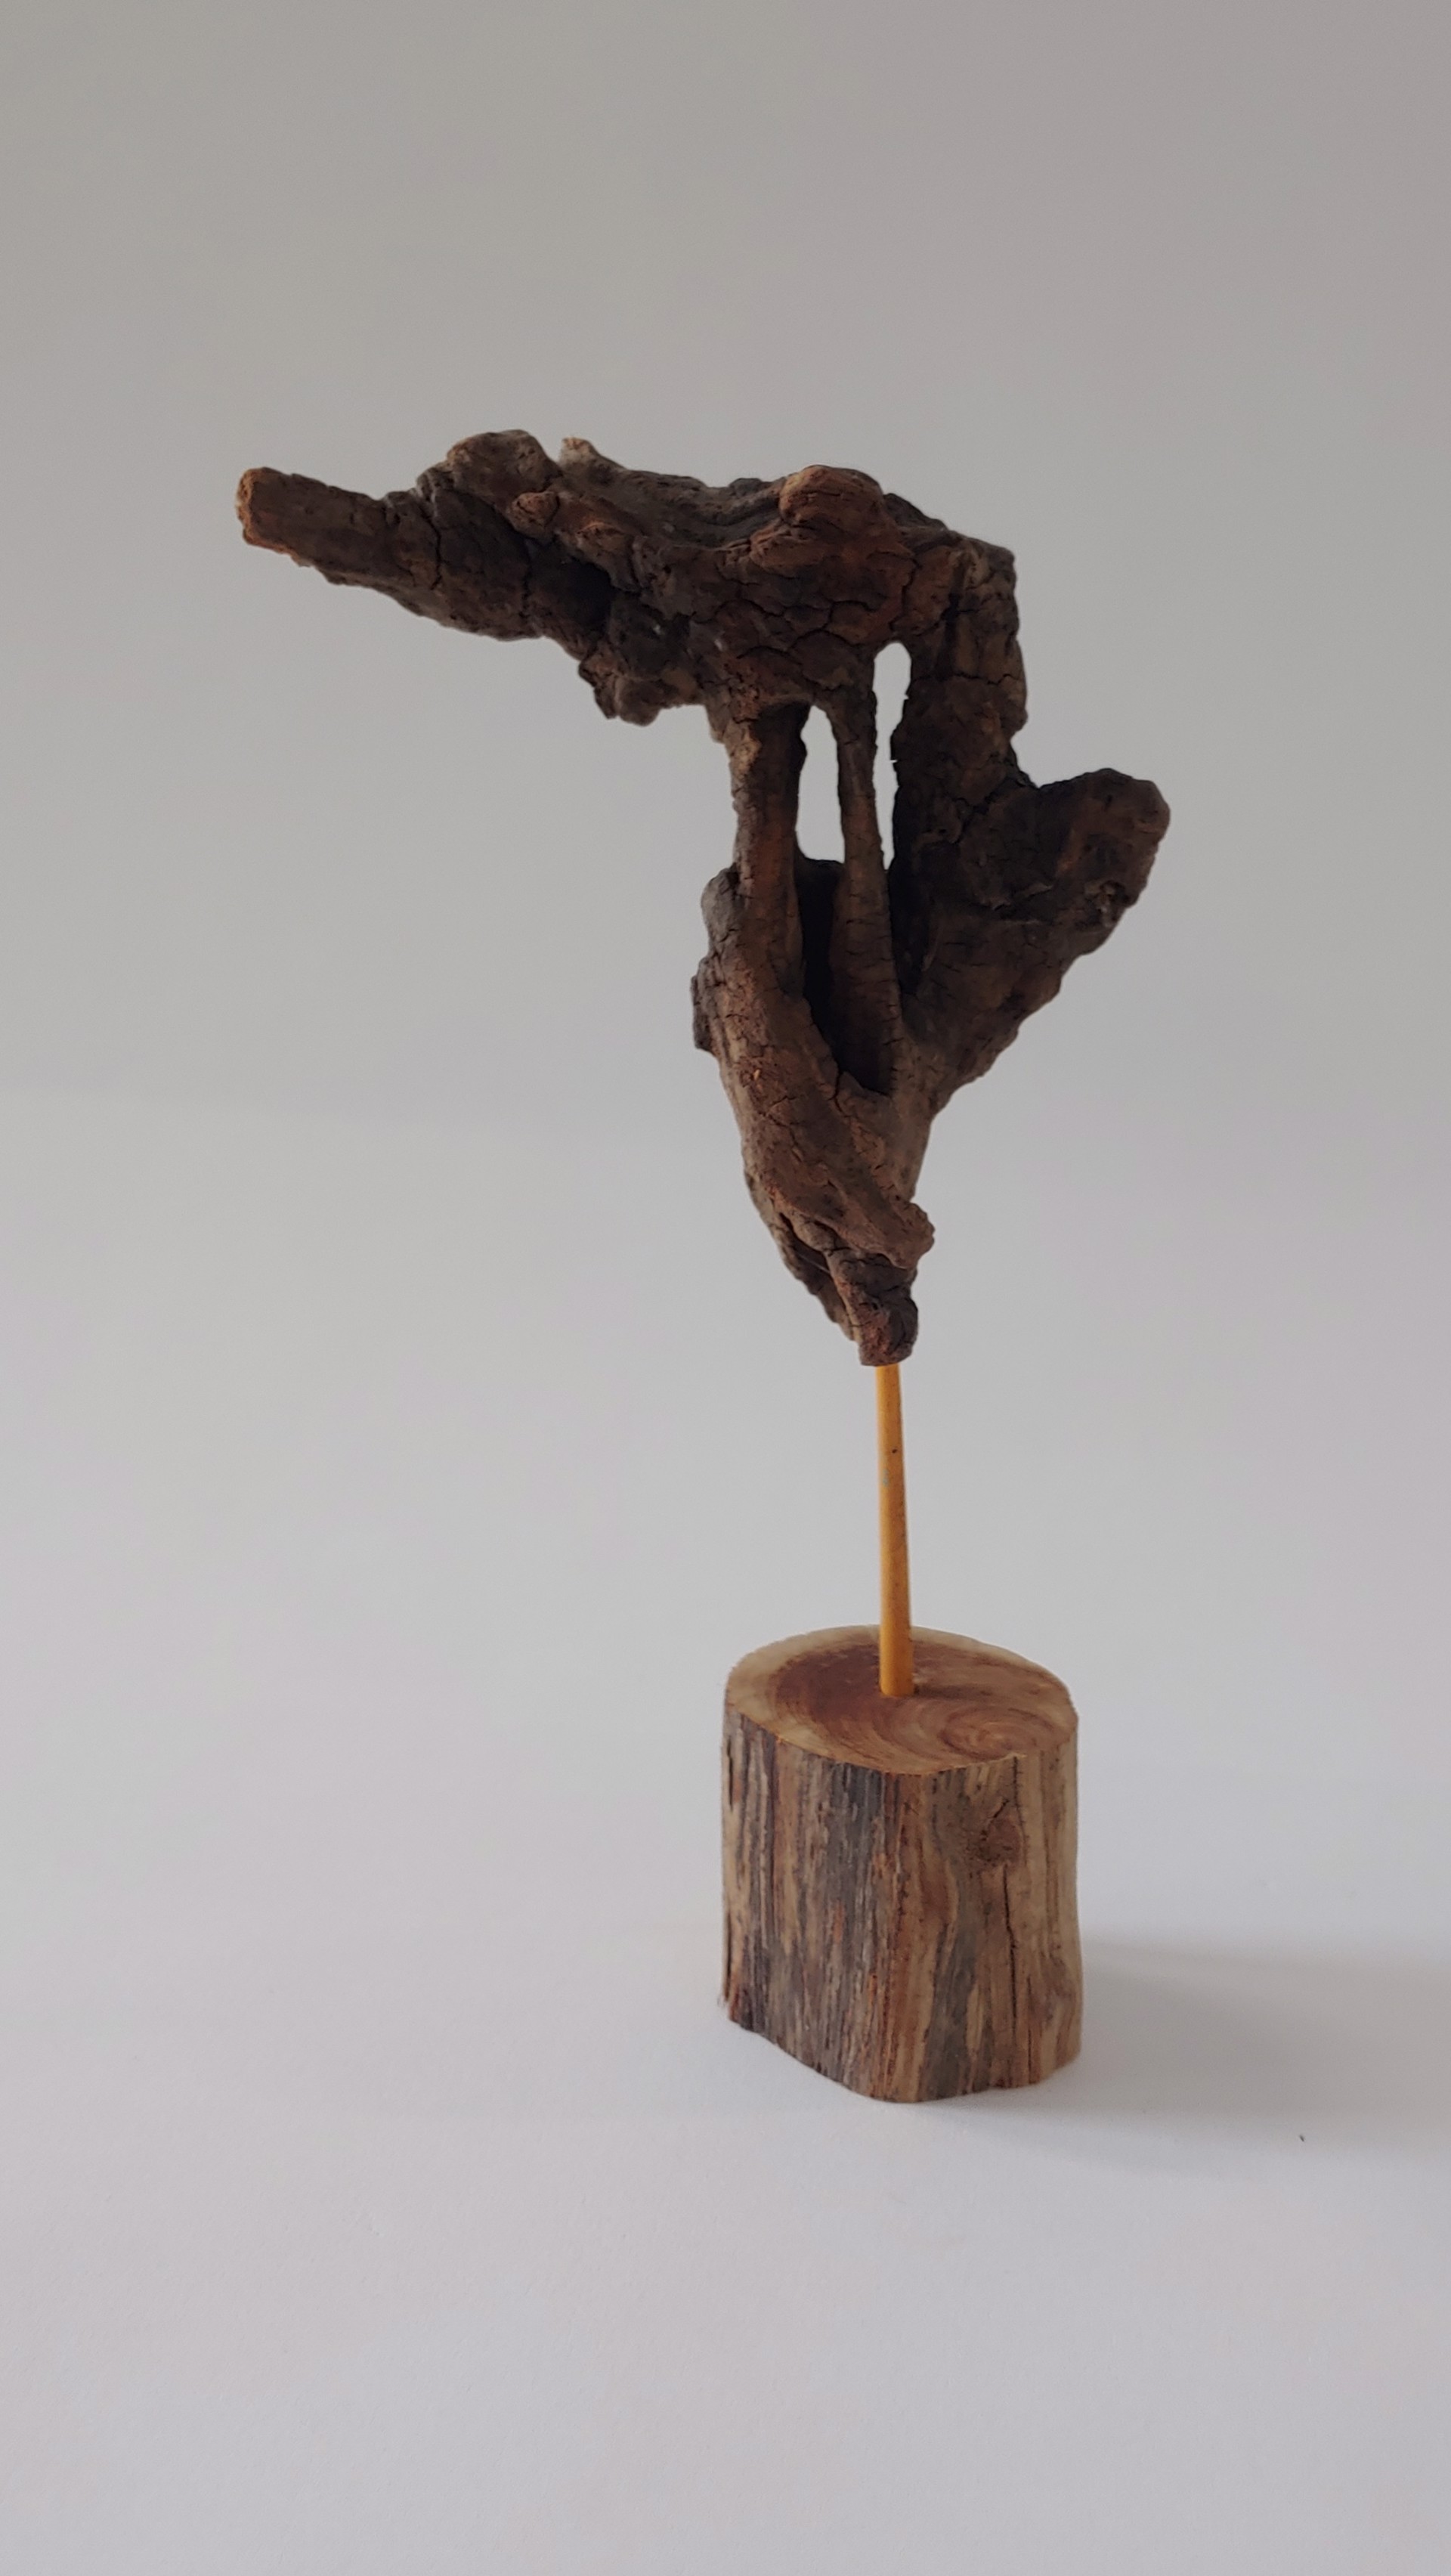 Abstract - Wood Sculpture by David Amdur